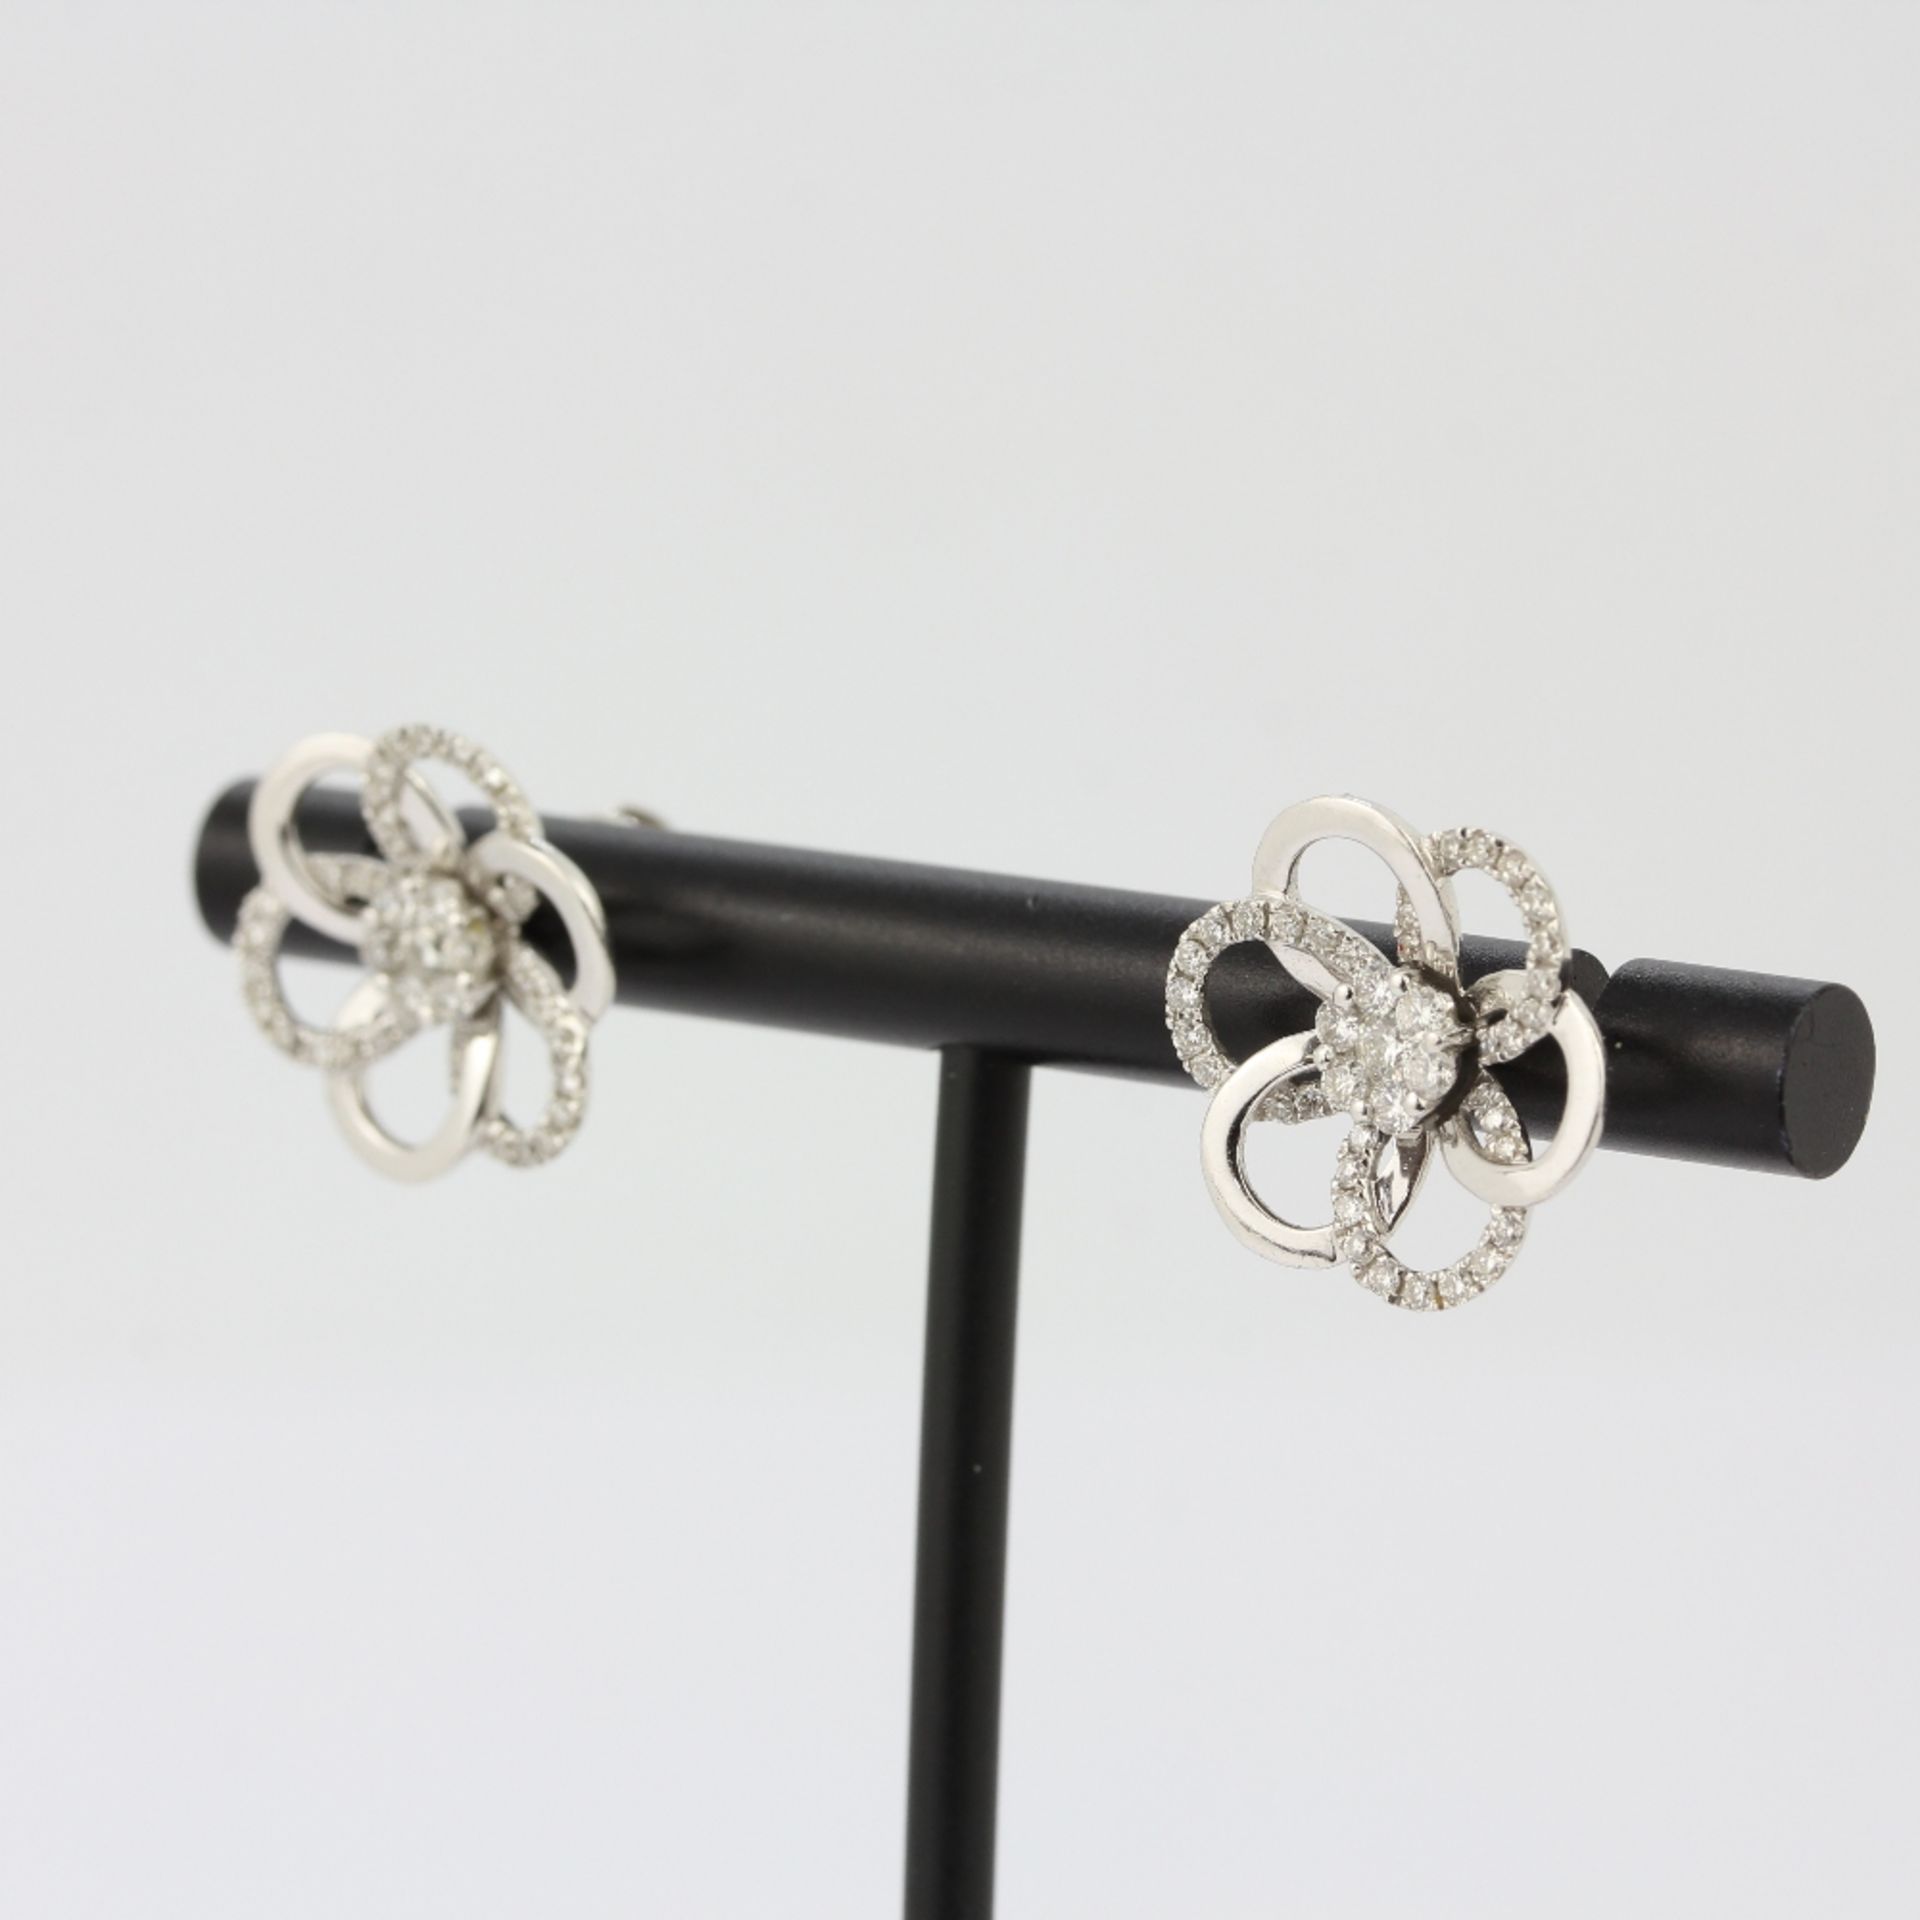 A pair of 18ct white gold flower shaped stud earrings set with brilliant cut diamonds, L. 1.6cm. - Image 3 of 4